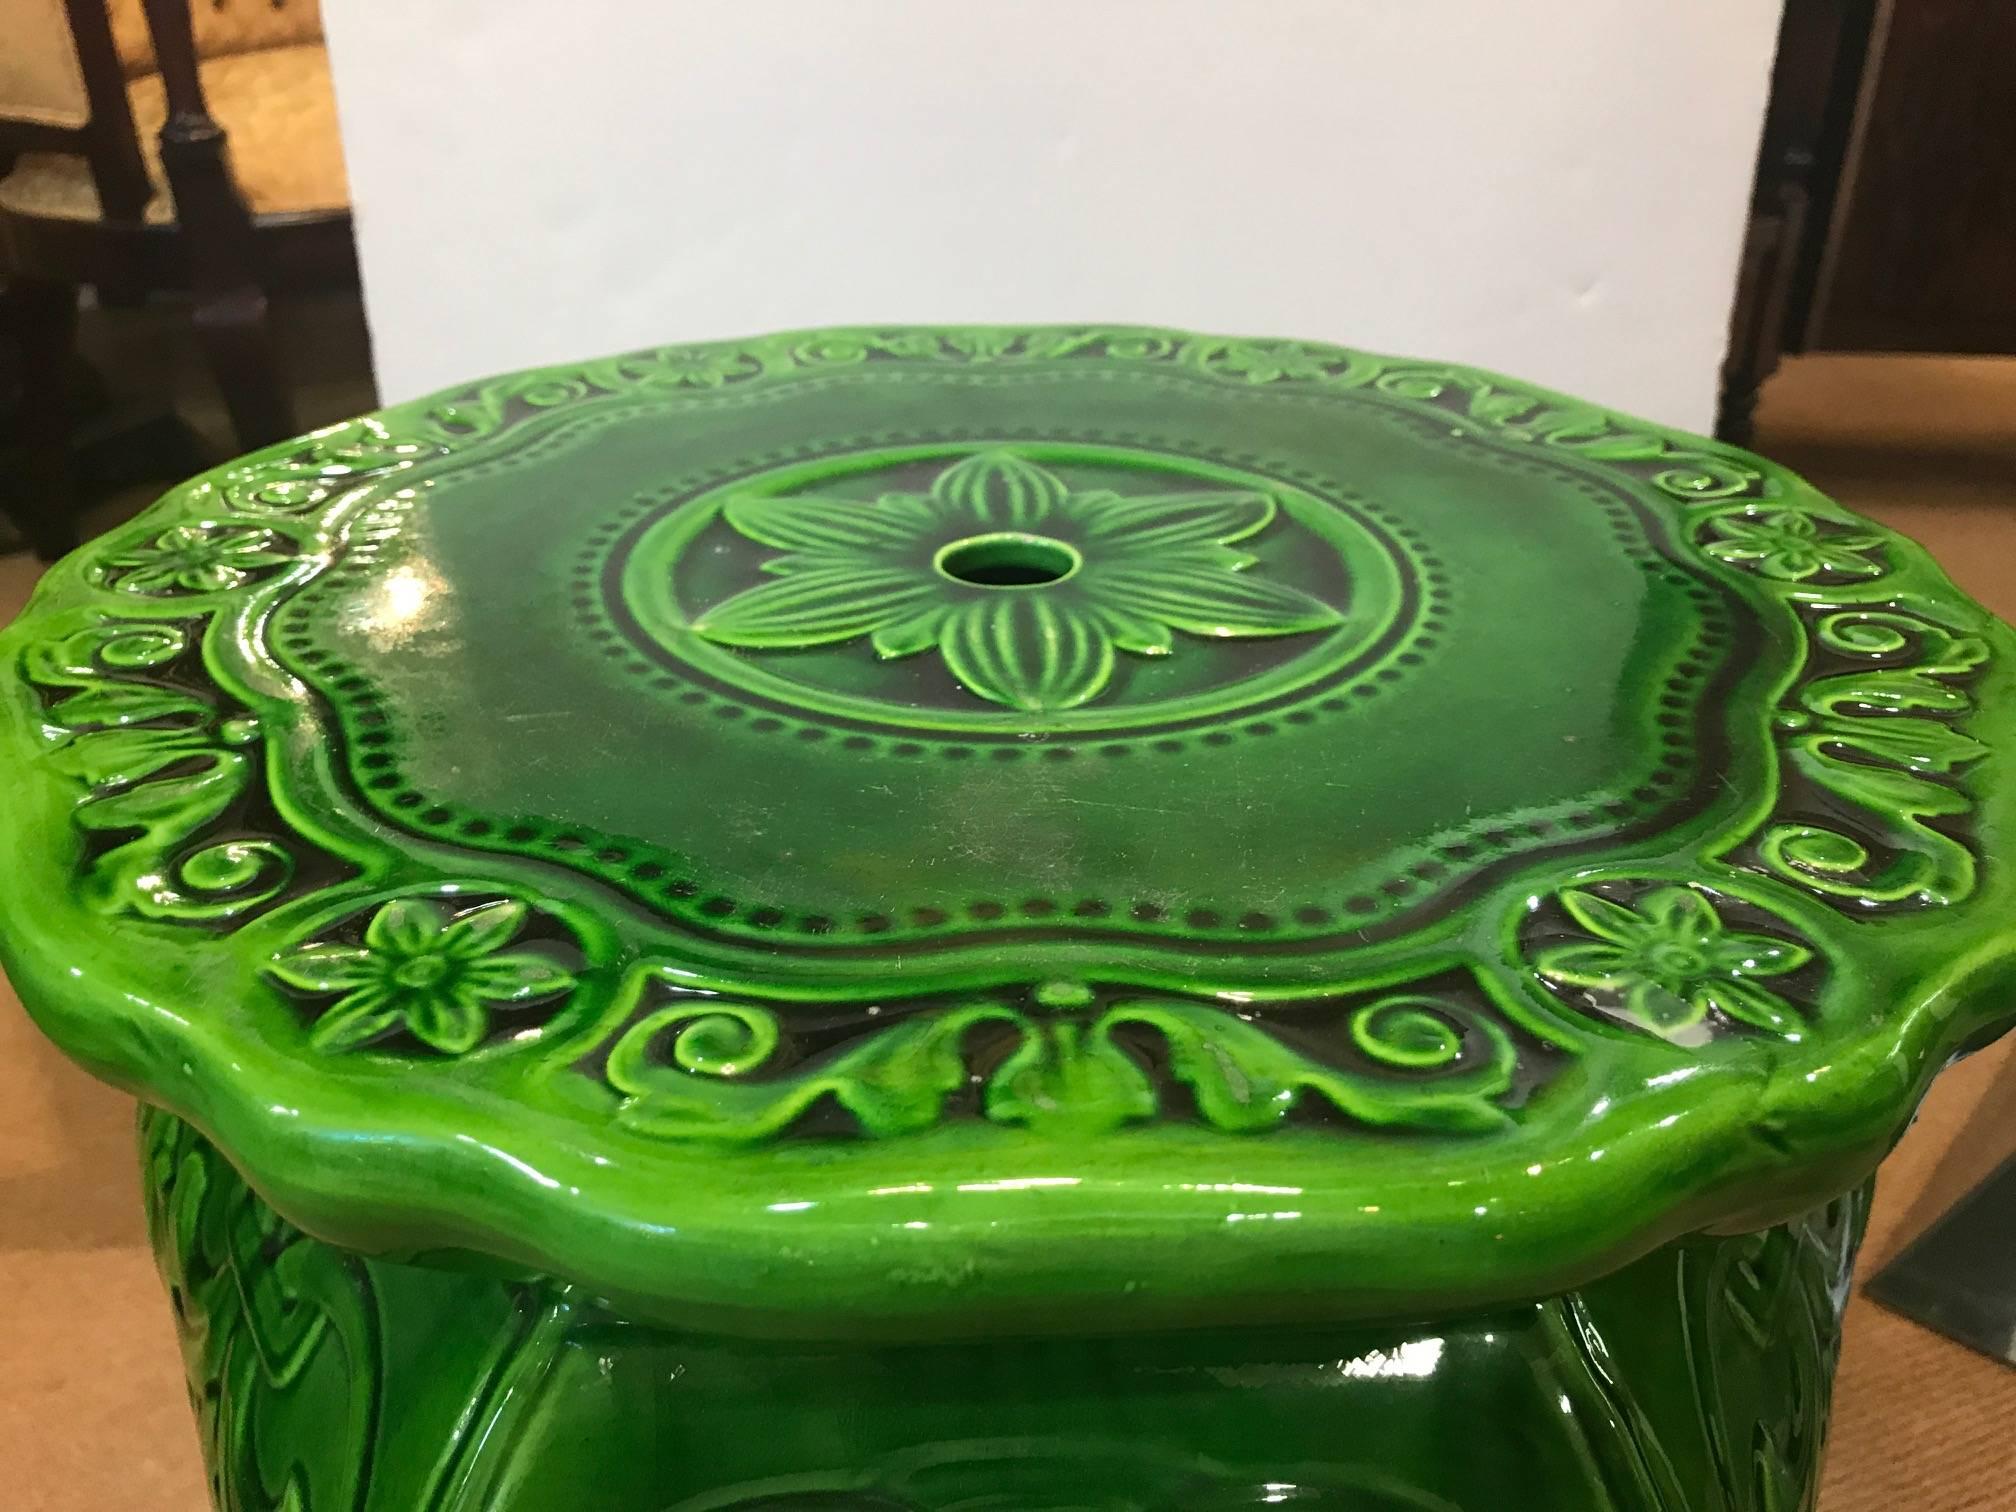 A vibrant green Majolica garden seat, made by Minton, year mark 1897. Designed by Augustus Welby Pugin, hexagonal bauluster form body . Marked on the underside Minton and England #18 and mark of the swan. Elegant urn shape.